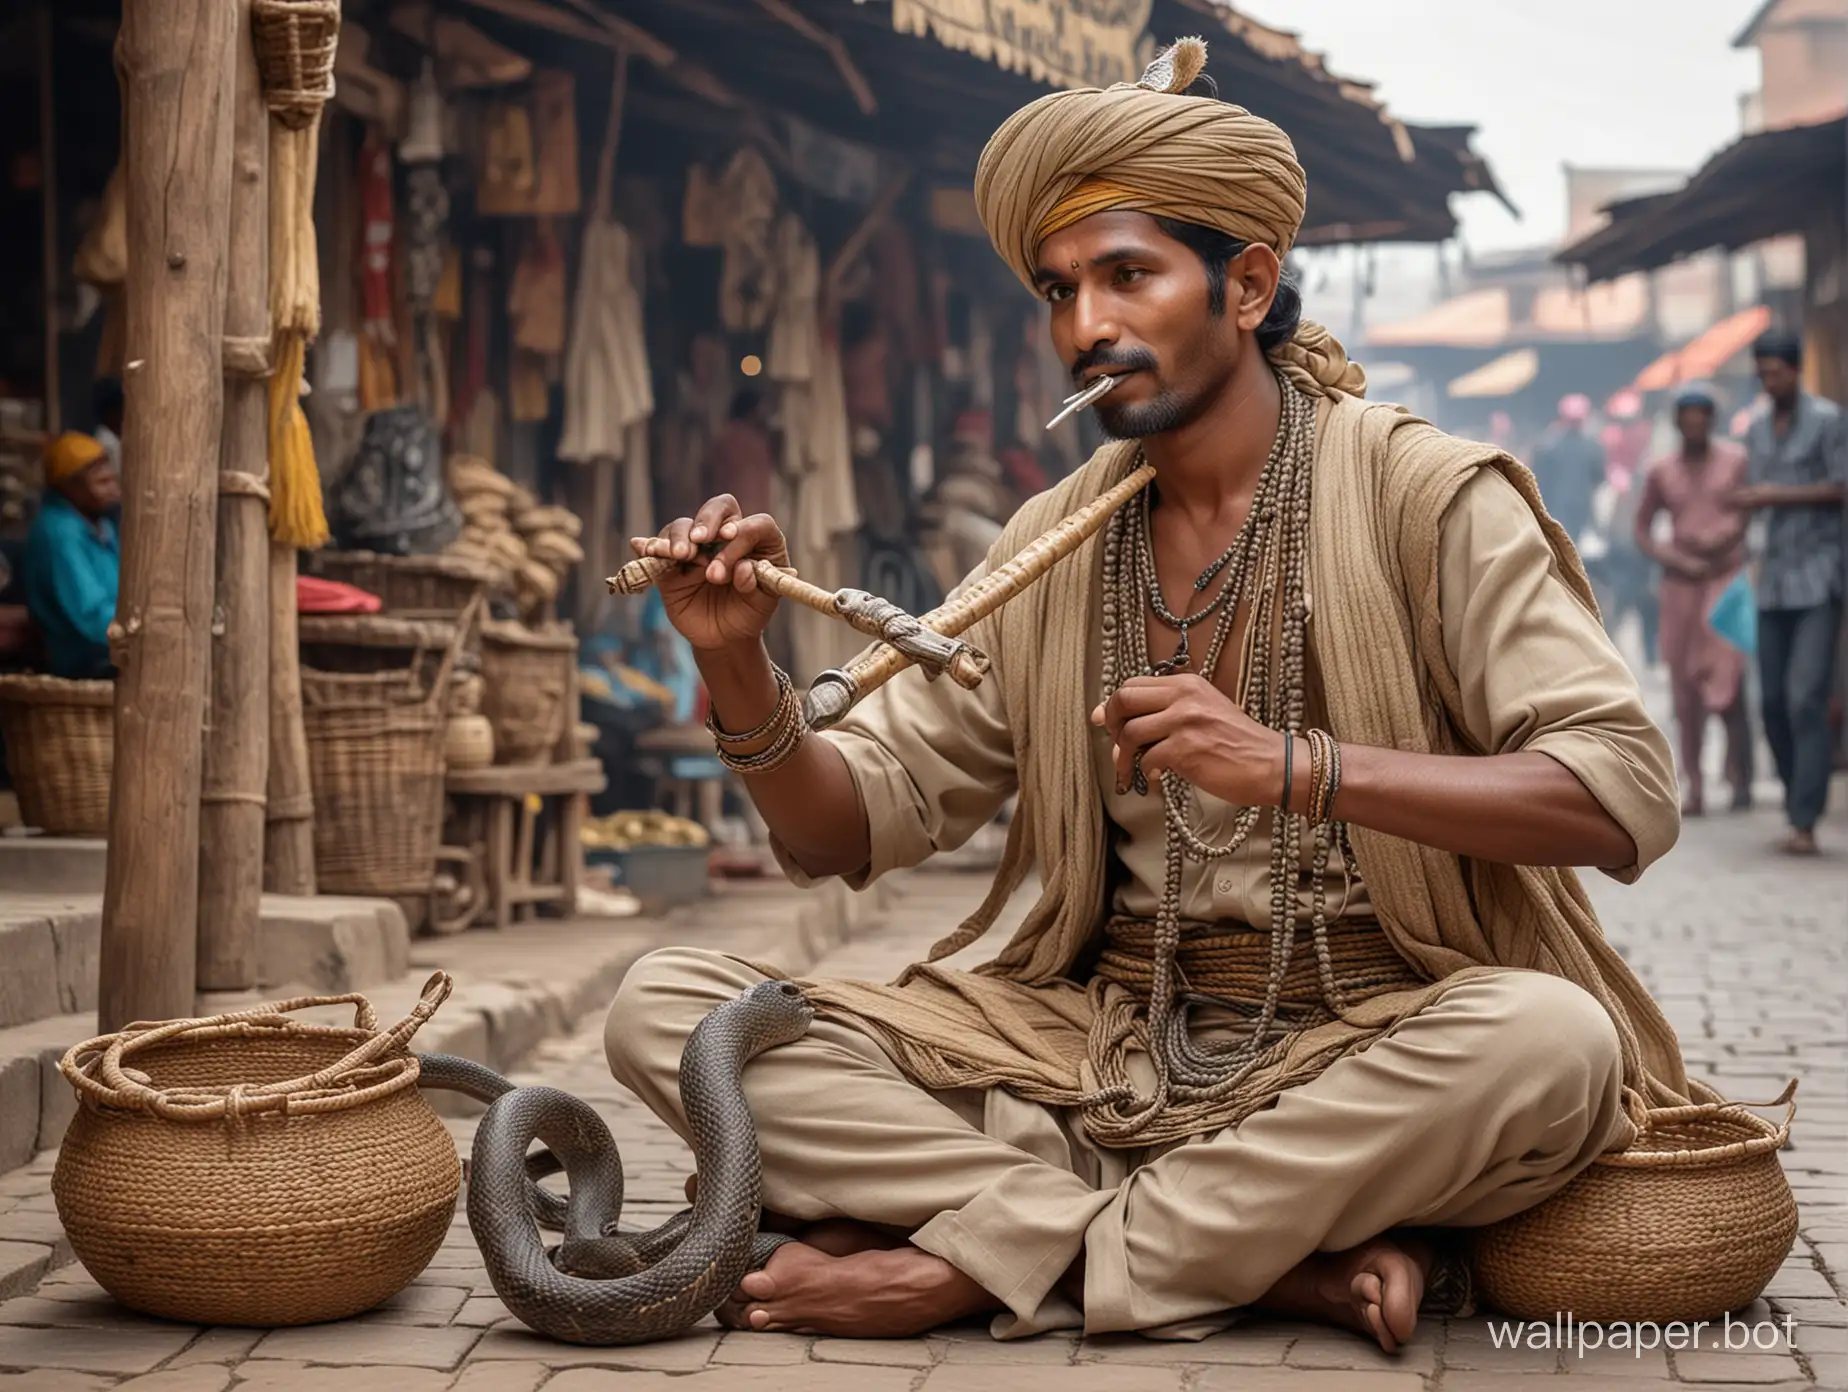 Indian-Snake-Charmer-in-bustling-marketplace-captivating-cobras-with-flute-music